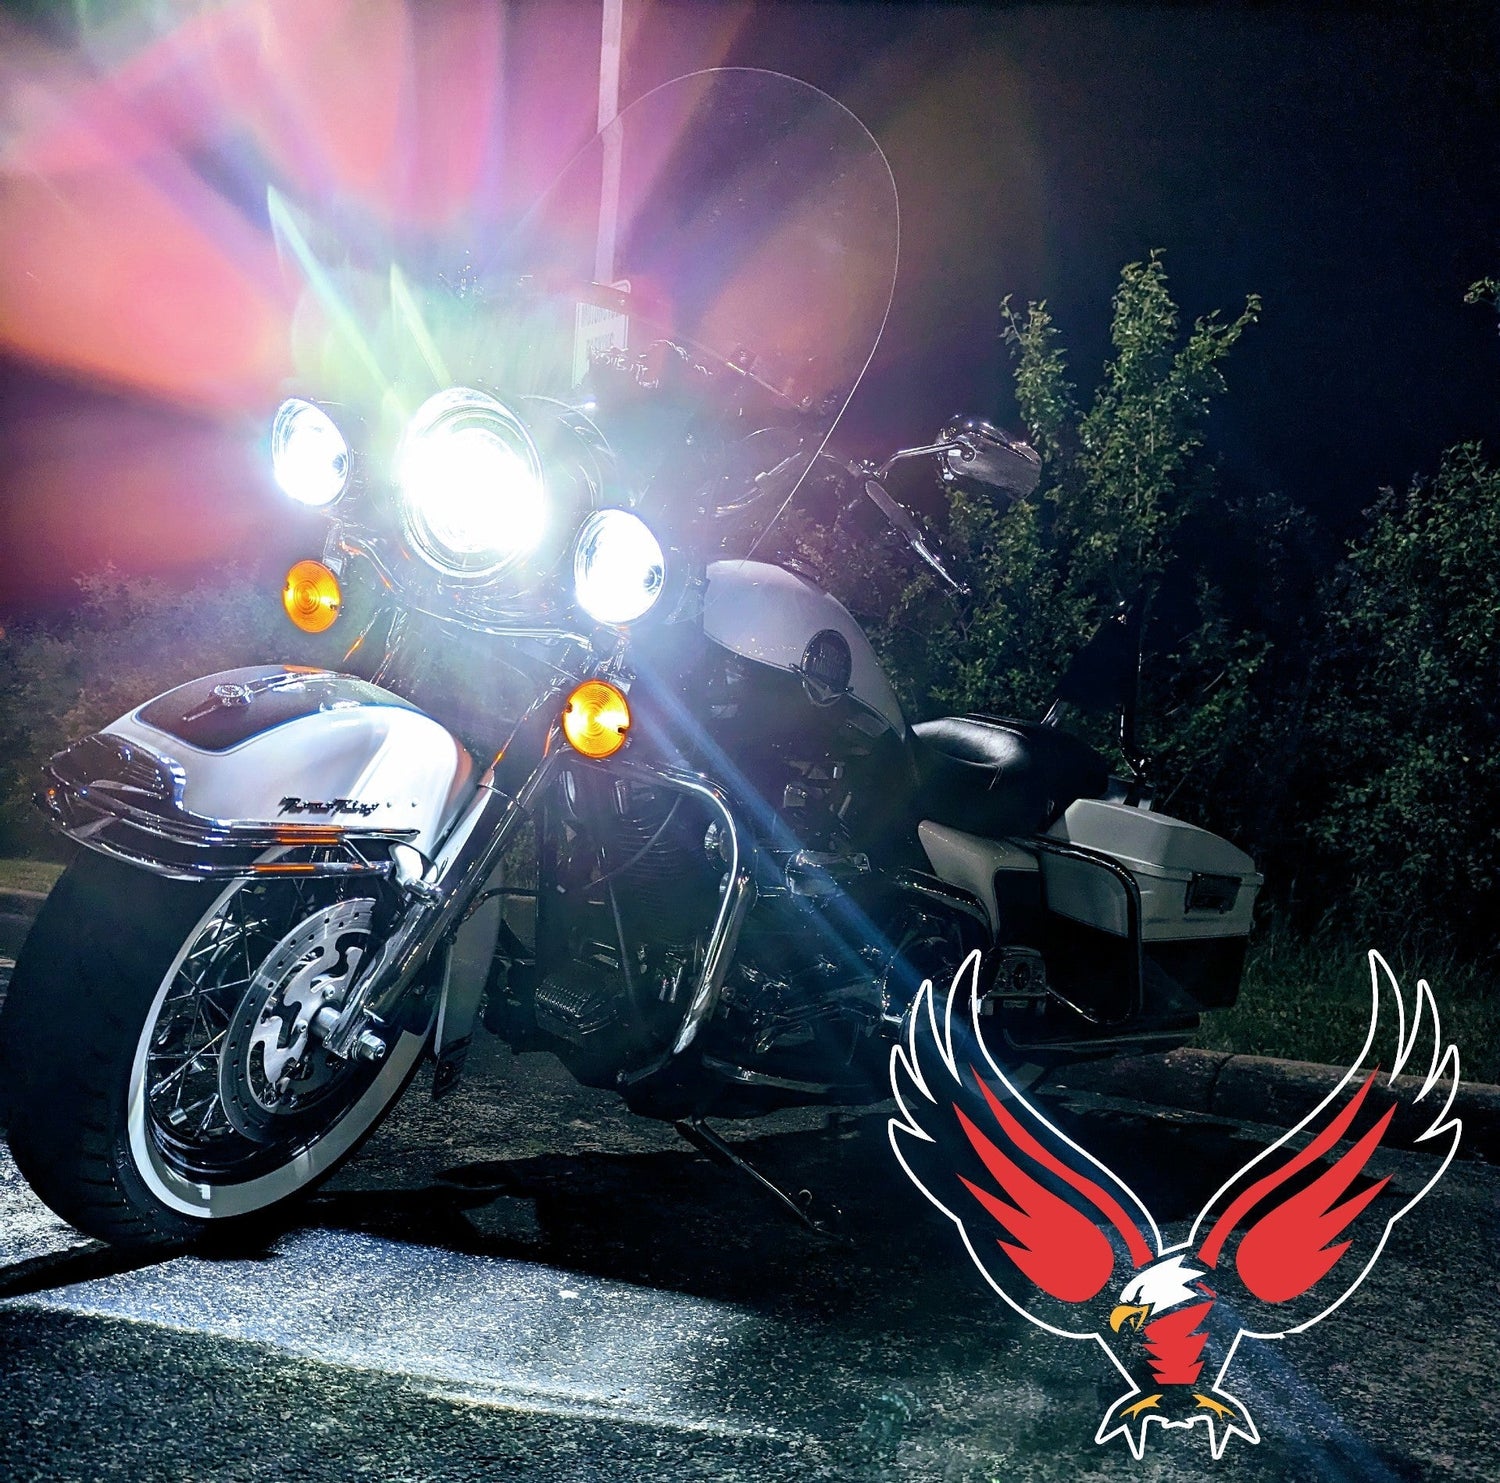 Enhance Your Harley Davidson Road King's Style and Safety with Eagle Lights 3 1/4" LED Turn Signals